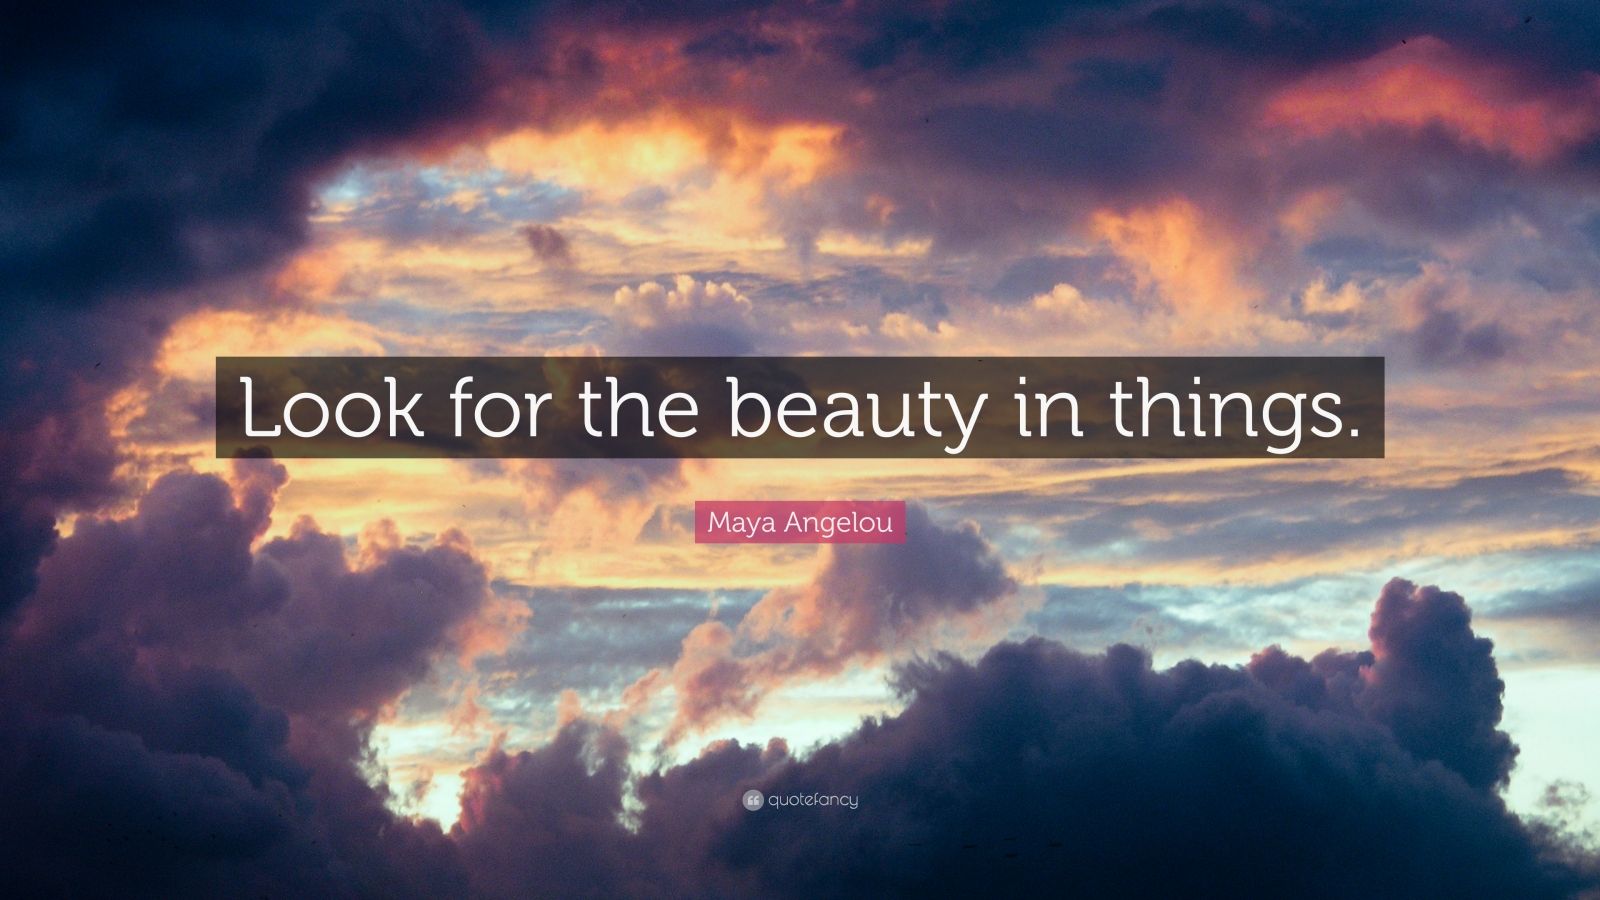 Maya Angelou Quote: "Look for the beauty in things." (7 ...